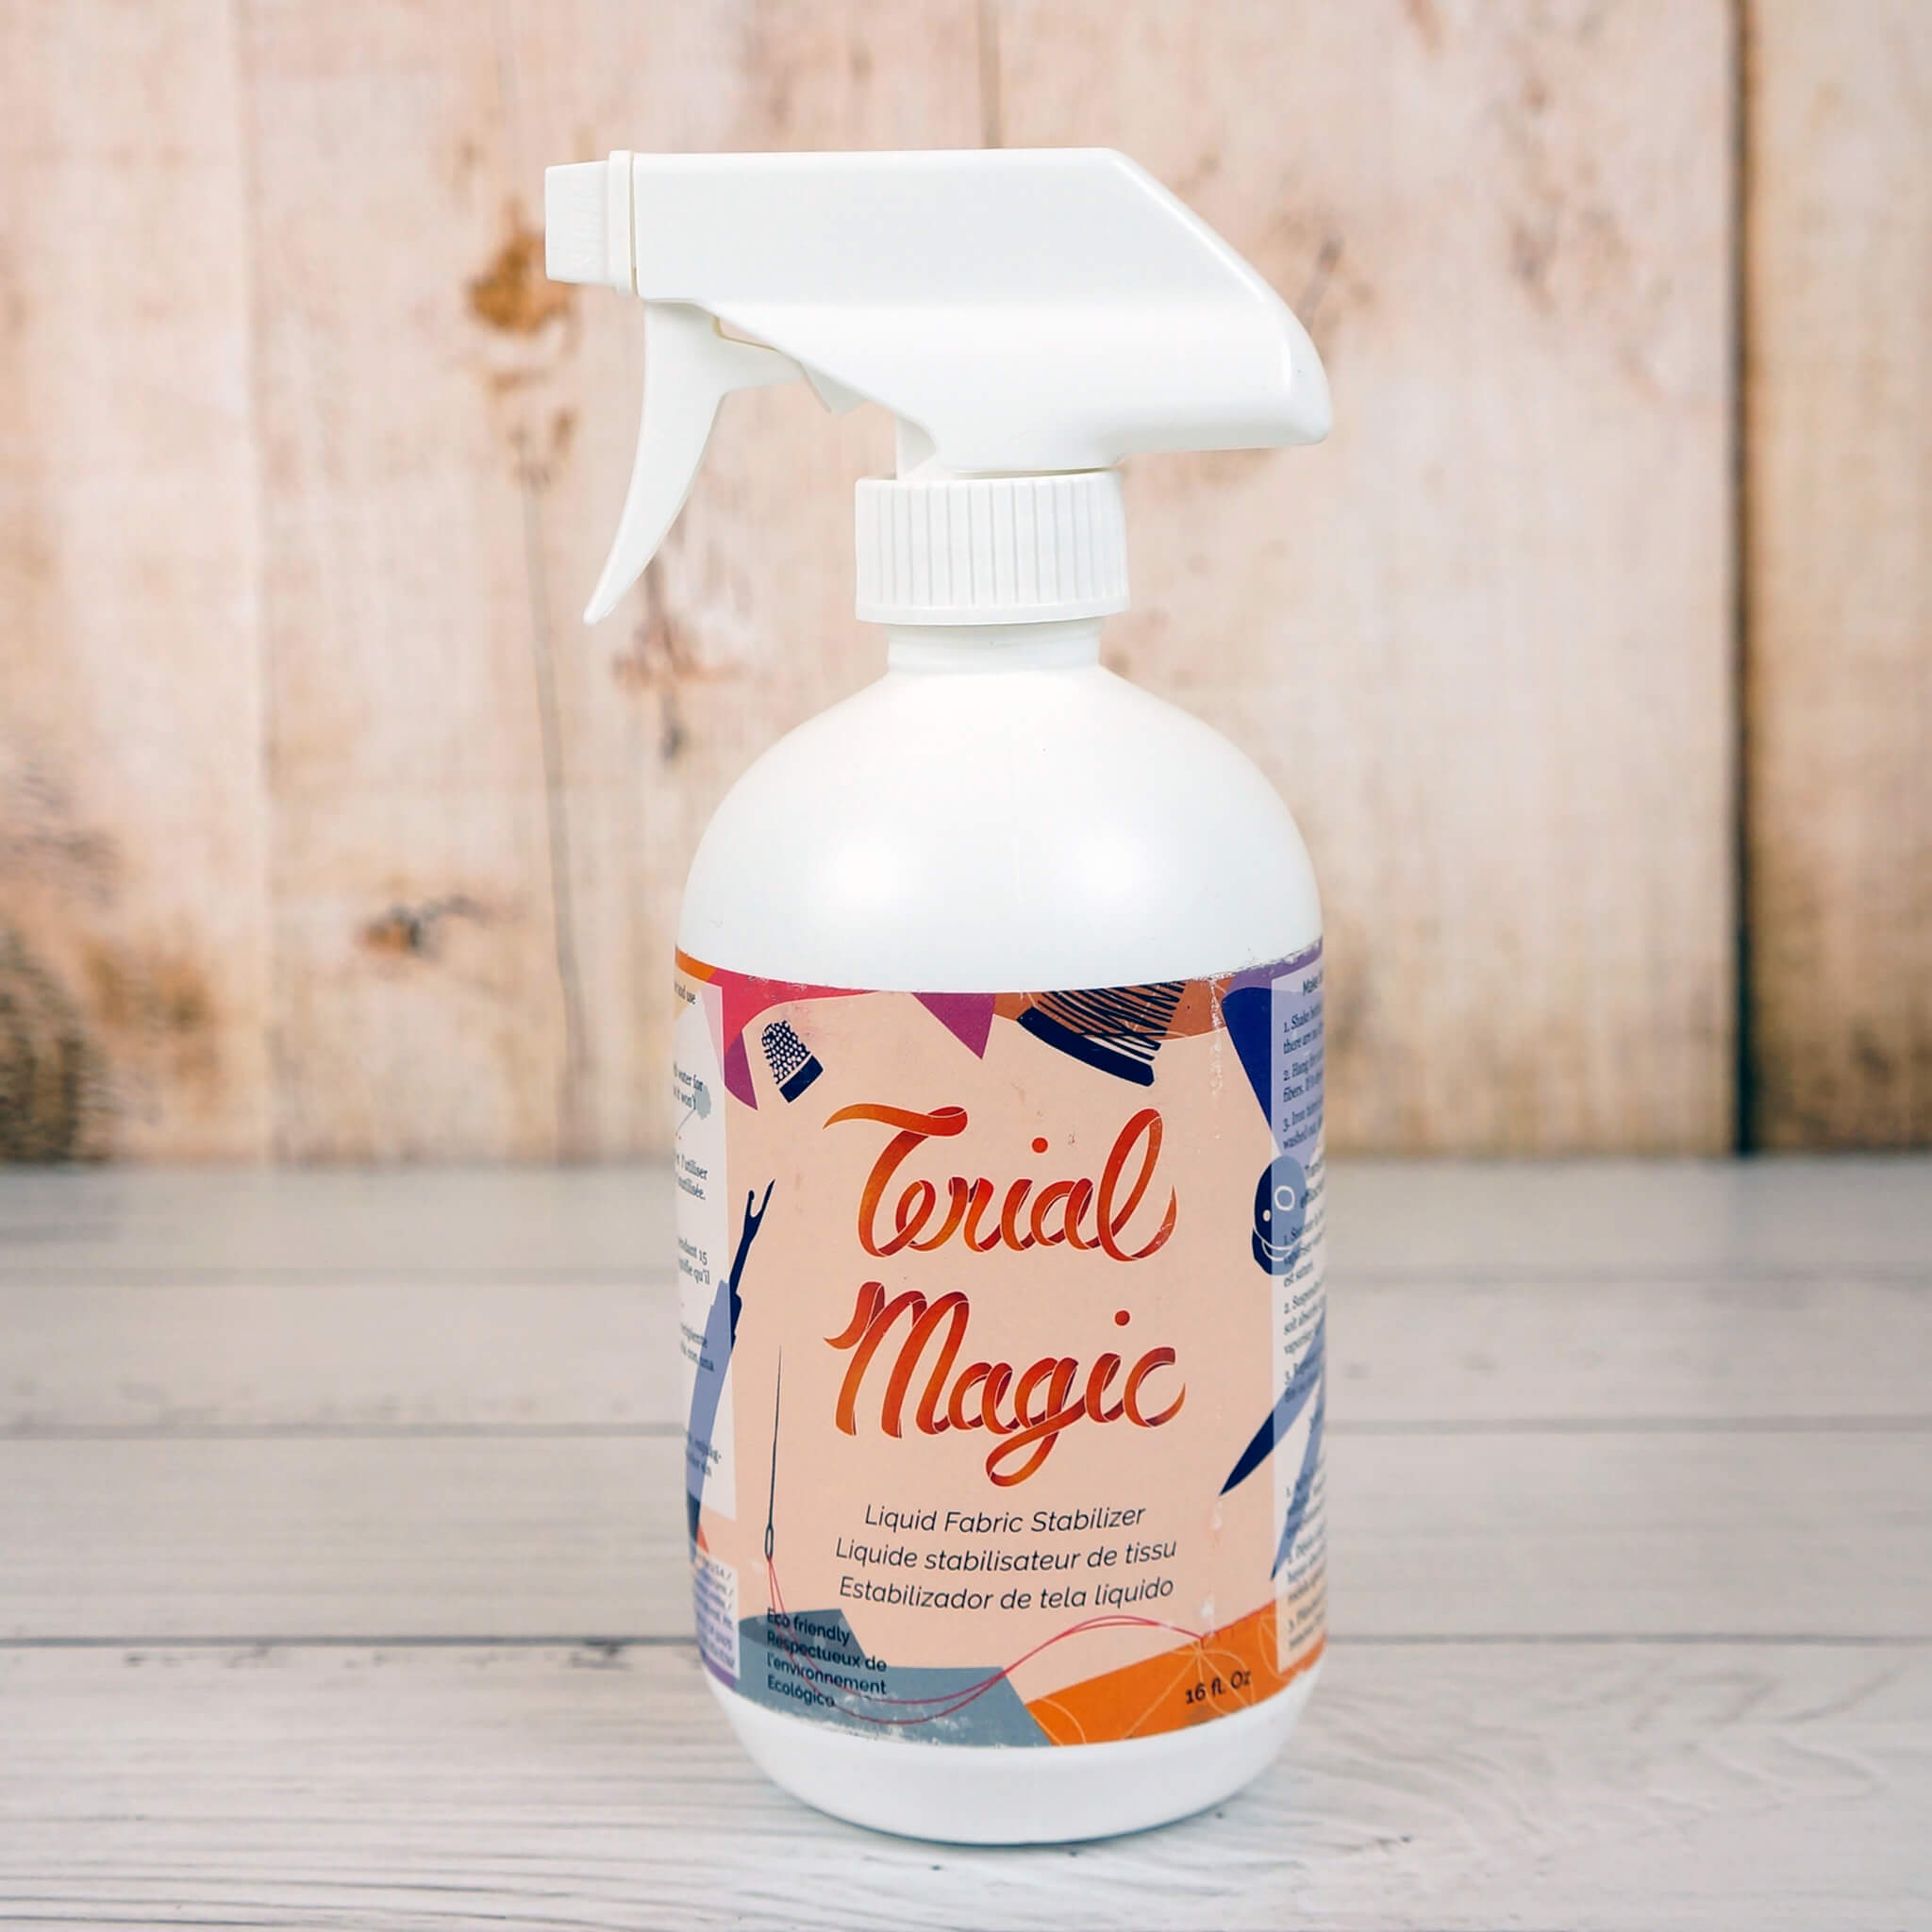 Brewer Sewing - Terial Magic 16 oz bottle